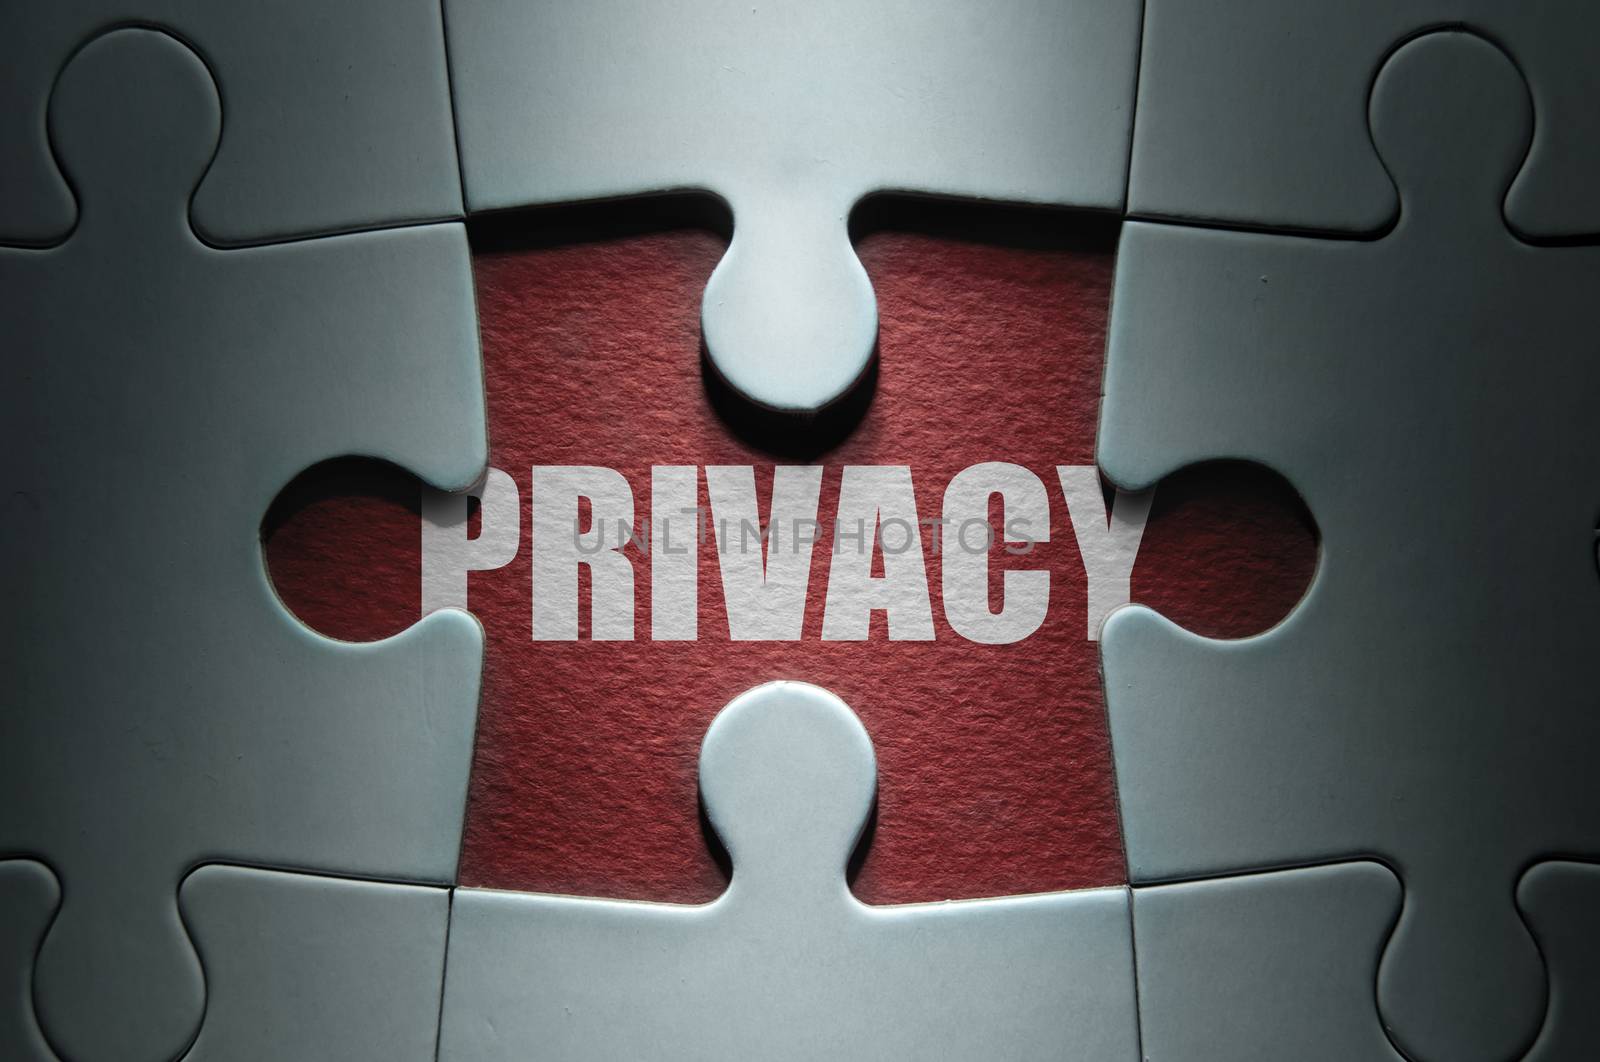 Missing piece from a jigsaw puzzle revealing the word privacy